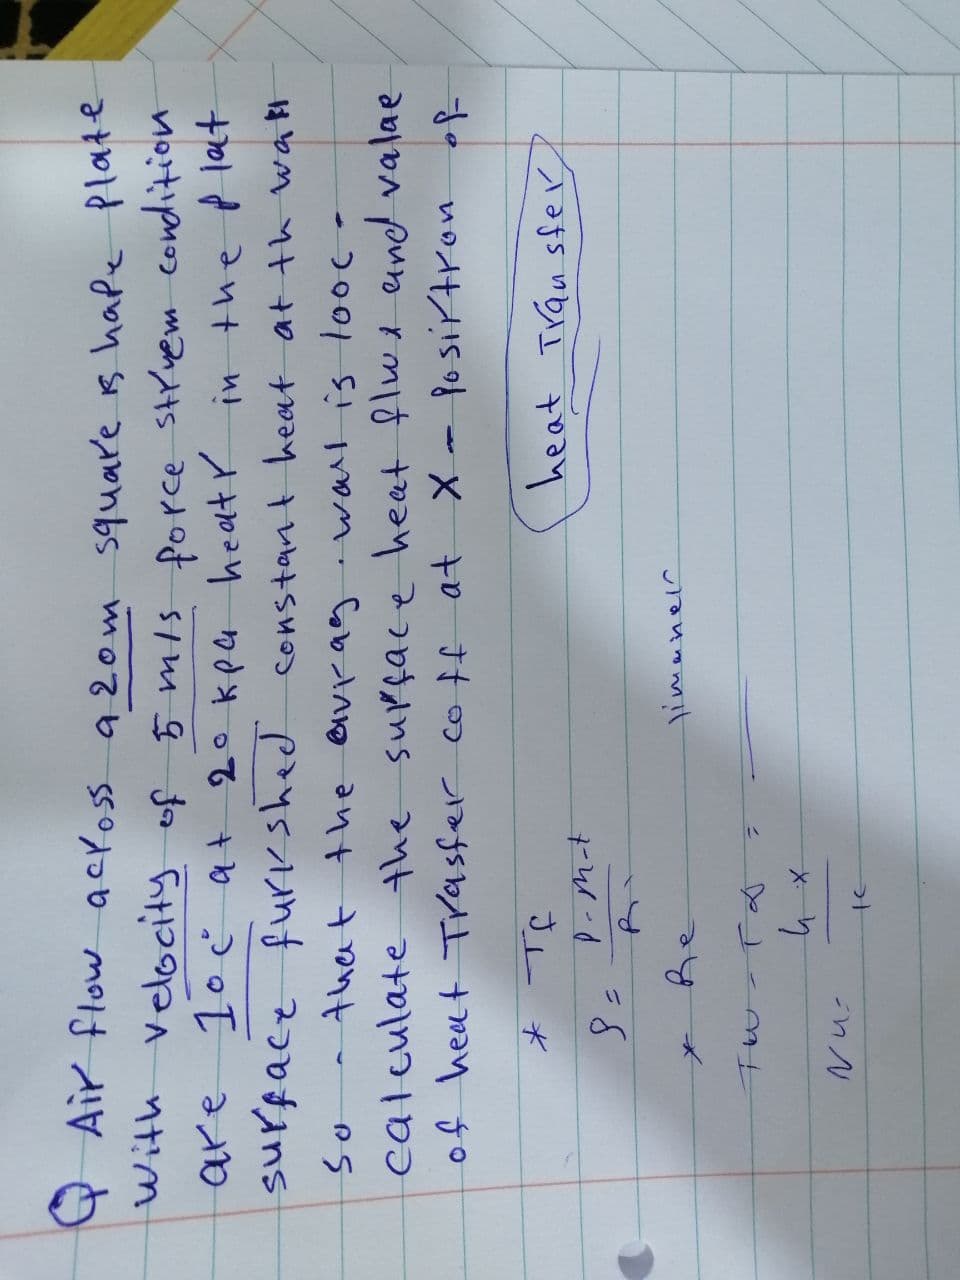 are
QAir flow across a 20m square is hape plate
with velocity of 5 m/s force struem condition
1° c at 20 kpa heat in the plat
surface furkshed
furkshed constant heat at the wall
So that the avrag wall is looc-
calculate the surface heat flux and valae
of heat Trasfer coff at X - Position of
heat Transfer
* те
8 =
P-m-t
Nu
Re
TW-T &
их
te
limanel
4